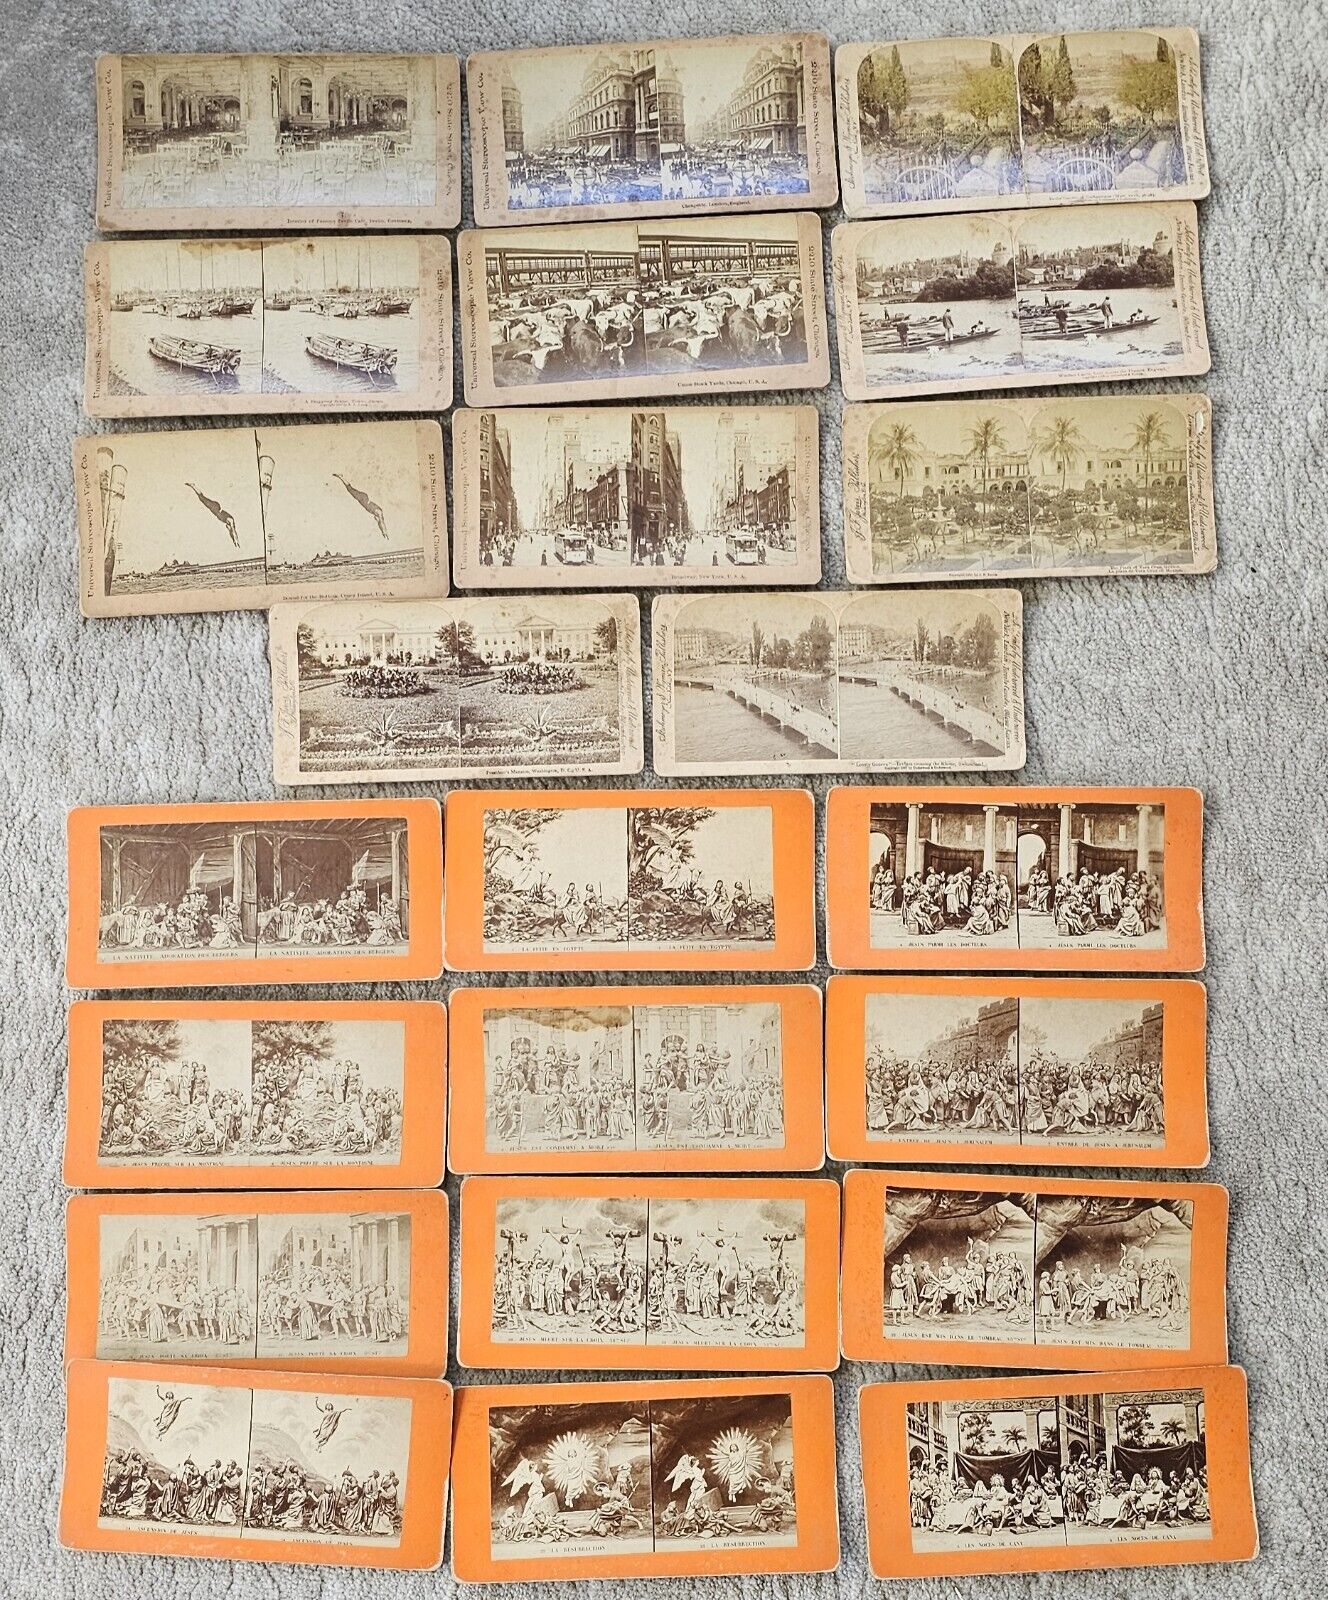 Lot 23 Vtg Stereoview Antique Card RELIGIOUS Stereoscopic Broadway Stock yards